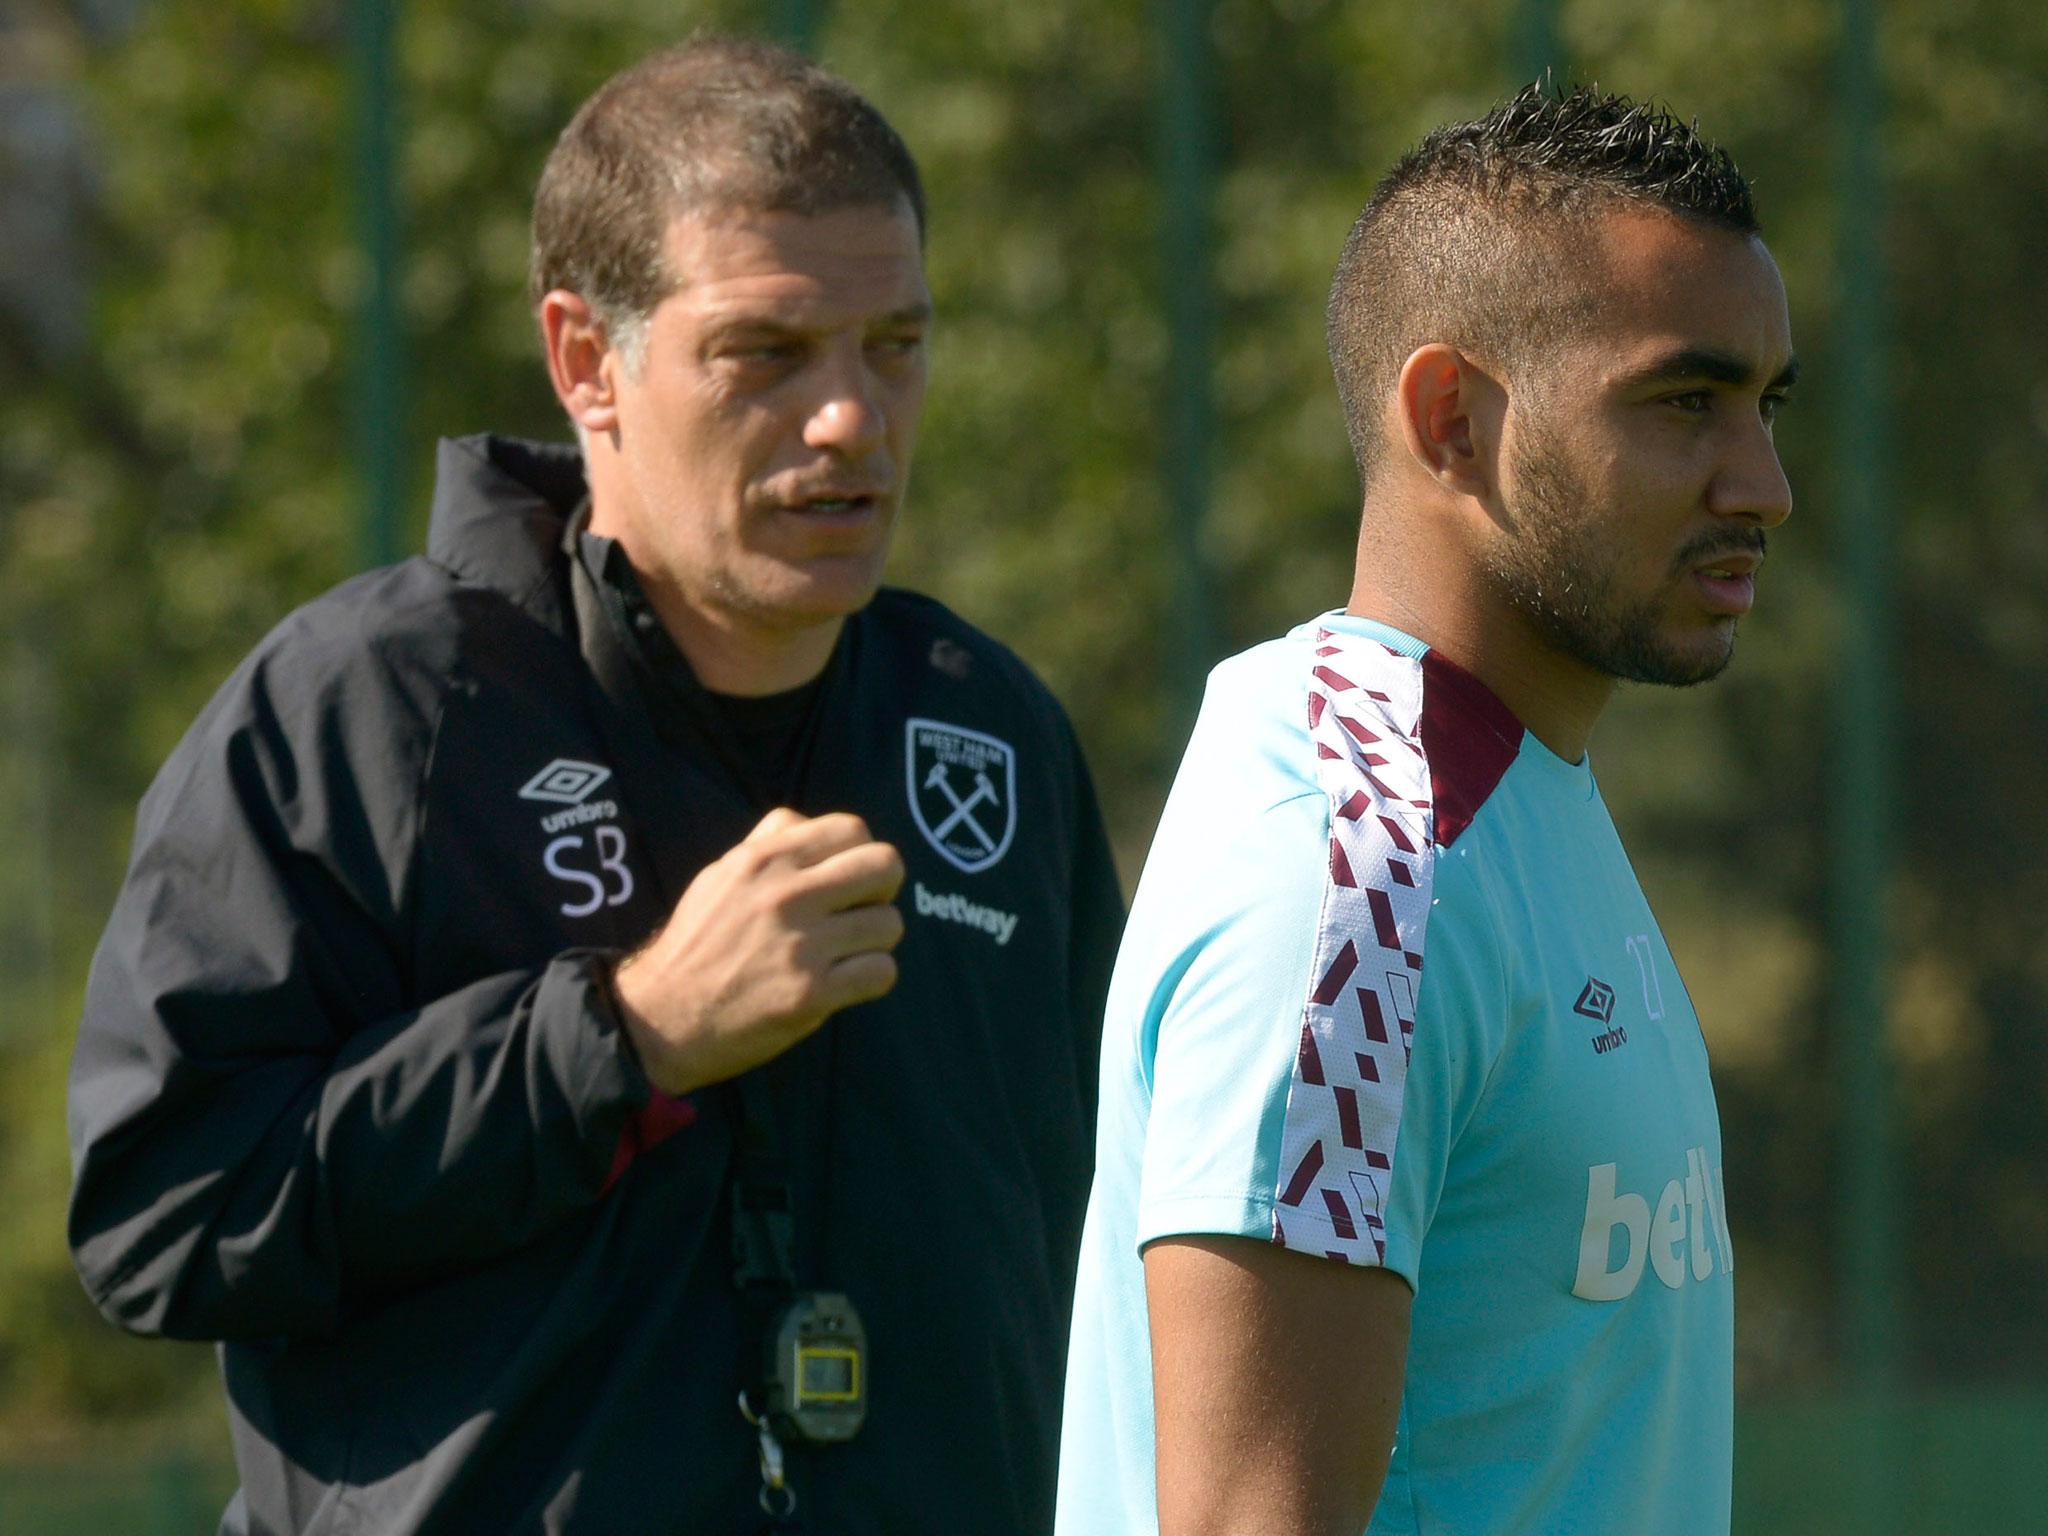 Bilic has banished Payet from the West Ham squad after he refused to play